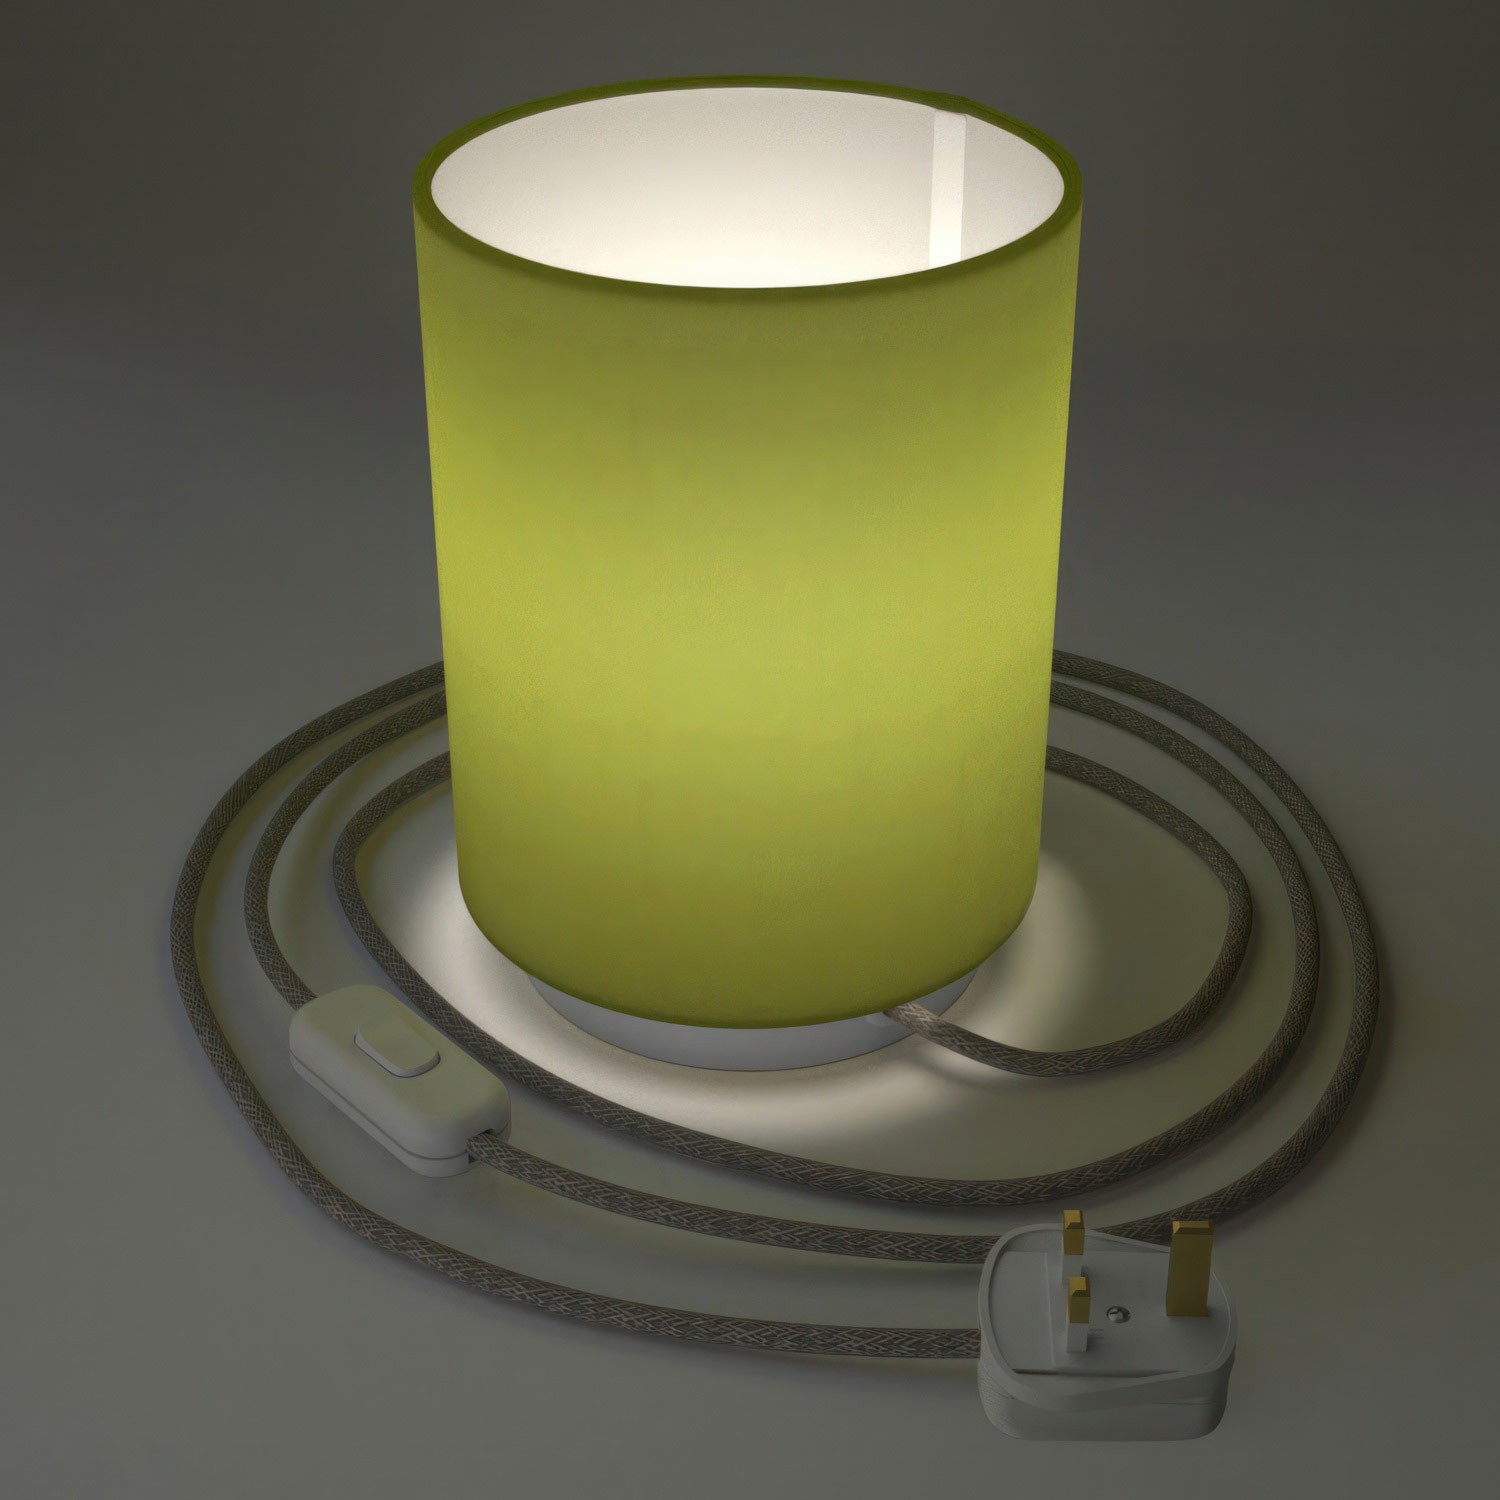 Posaluce in metal with Olive Green Canvas Cilindro lampshade, complete with fabric cable, switch and UK plug